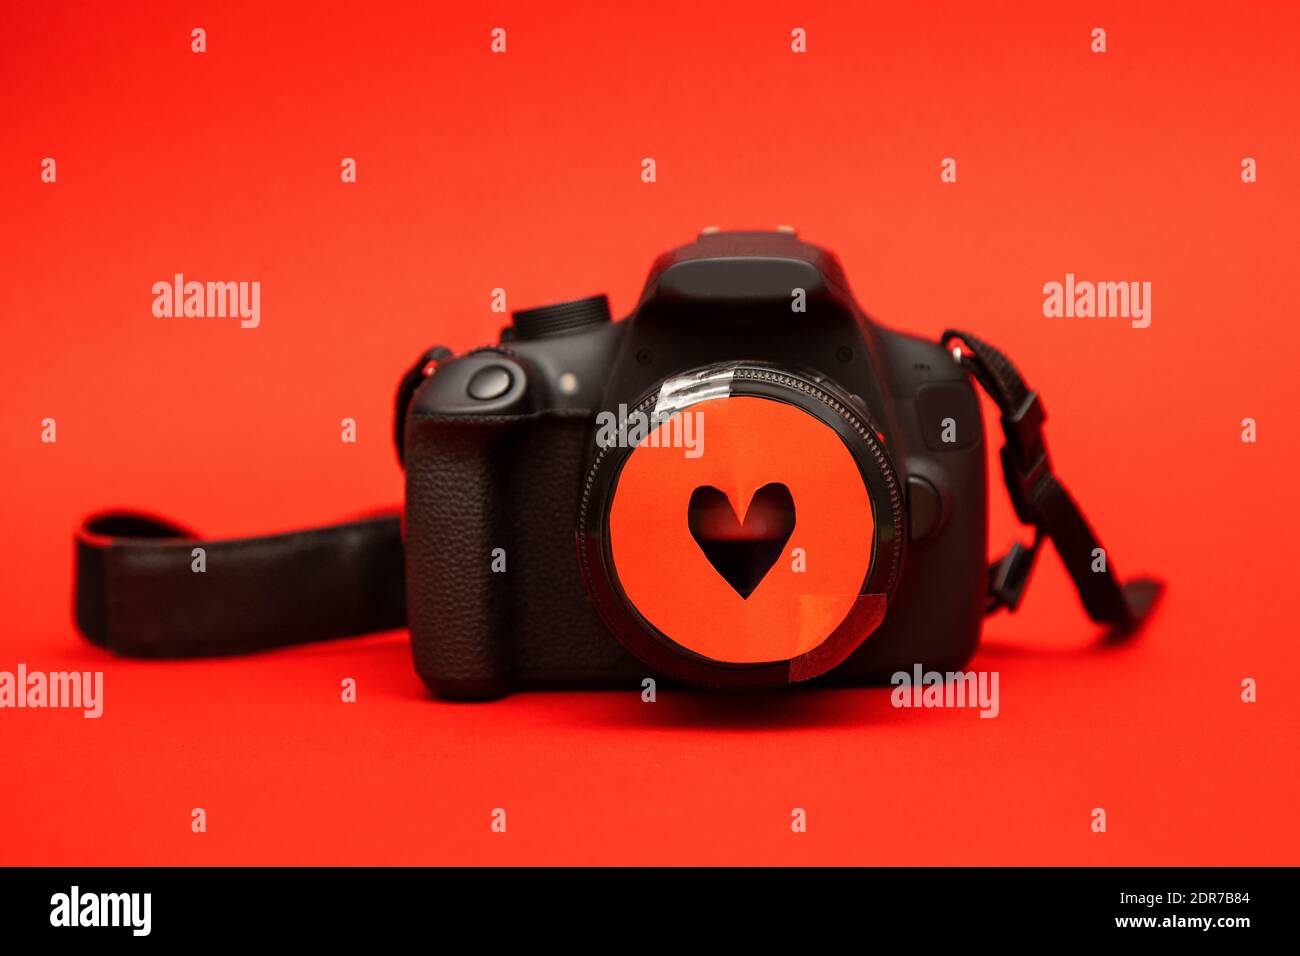 The concept of love through photography. Black camera with red carved heart on piece of paper attached to lens. Creative idea. Close-up photo Stock Photo